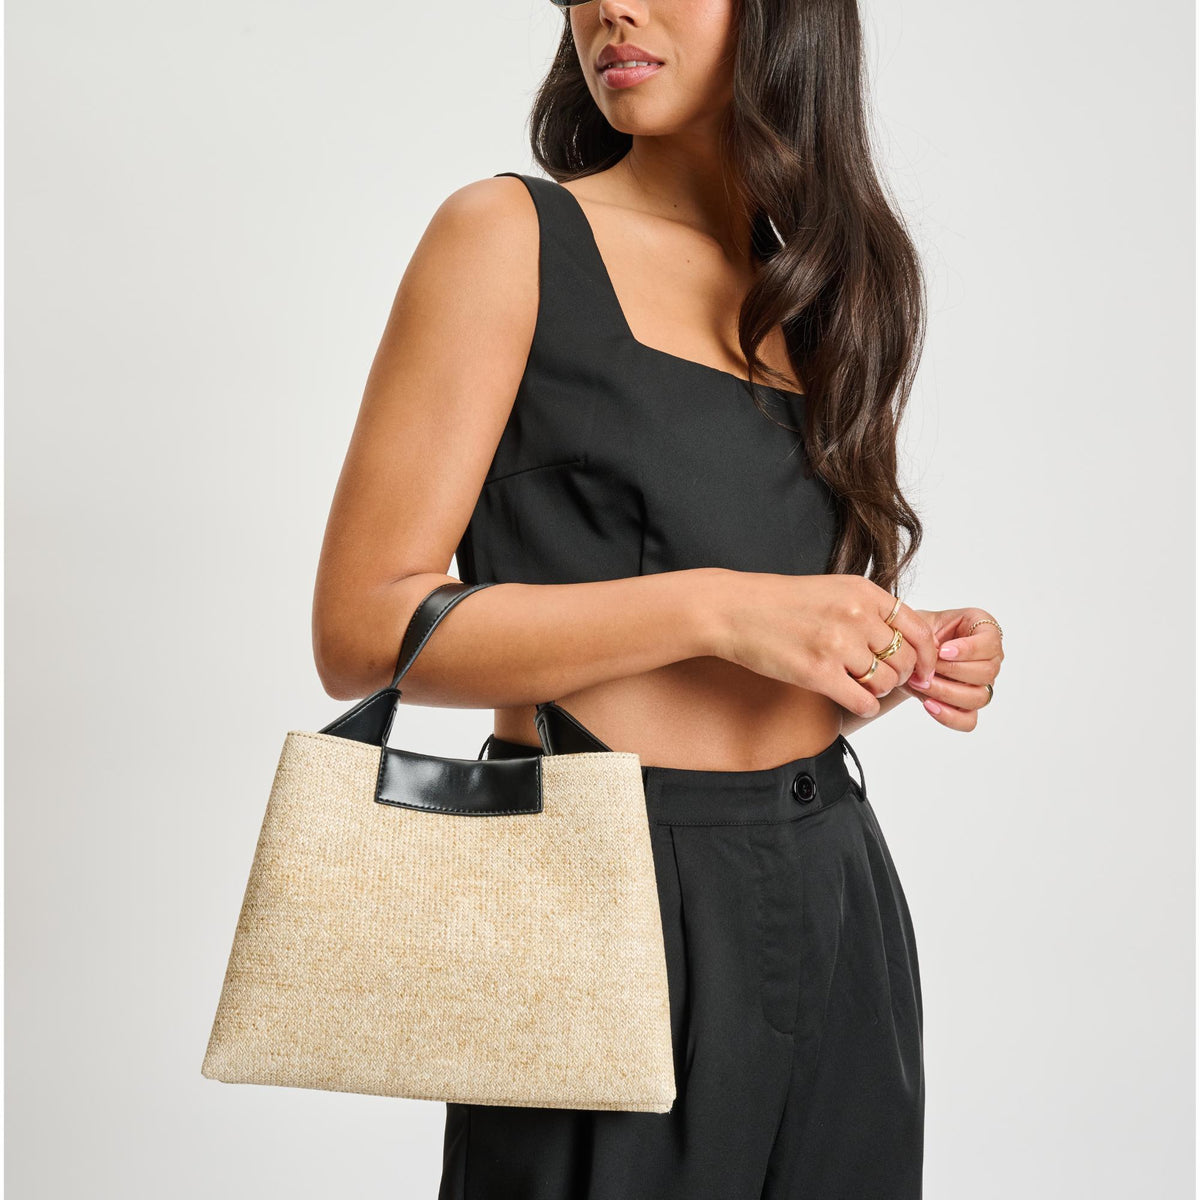 Woman wearing Natural Black Moda Luxe Sophistique Crossbody 842017134824 View 1 | Natural Black